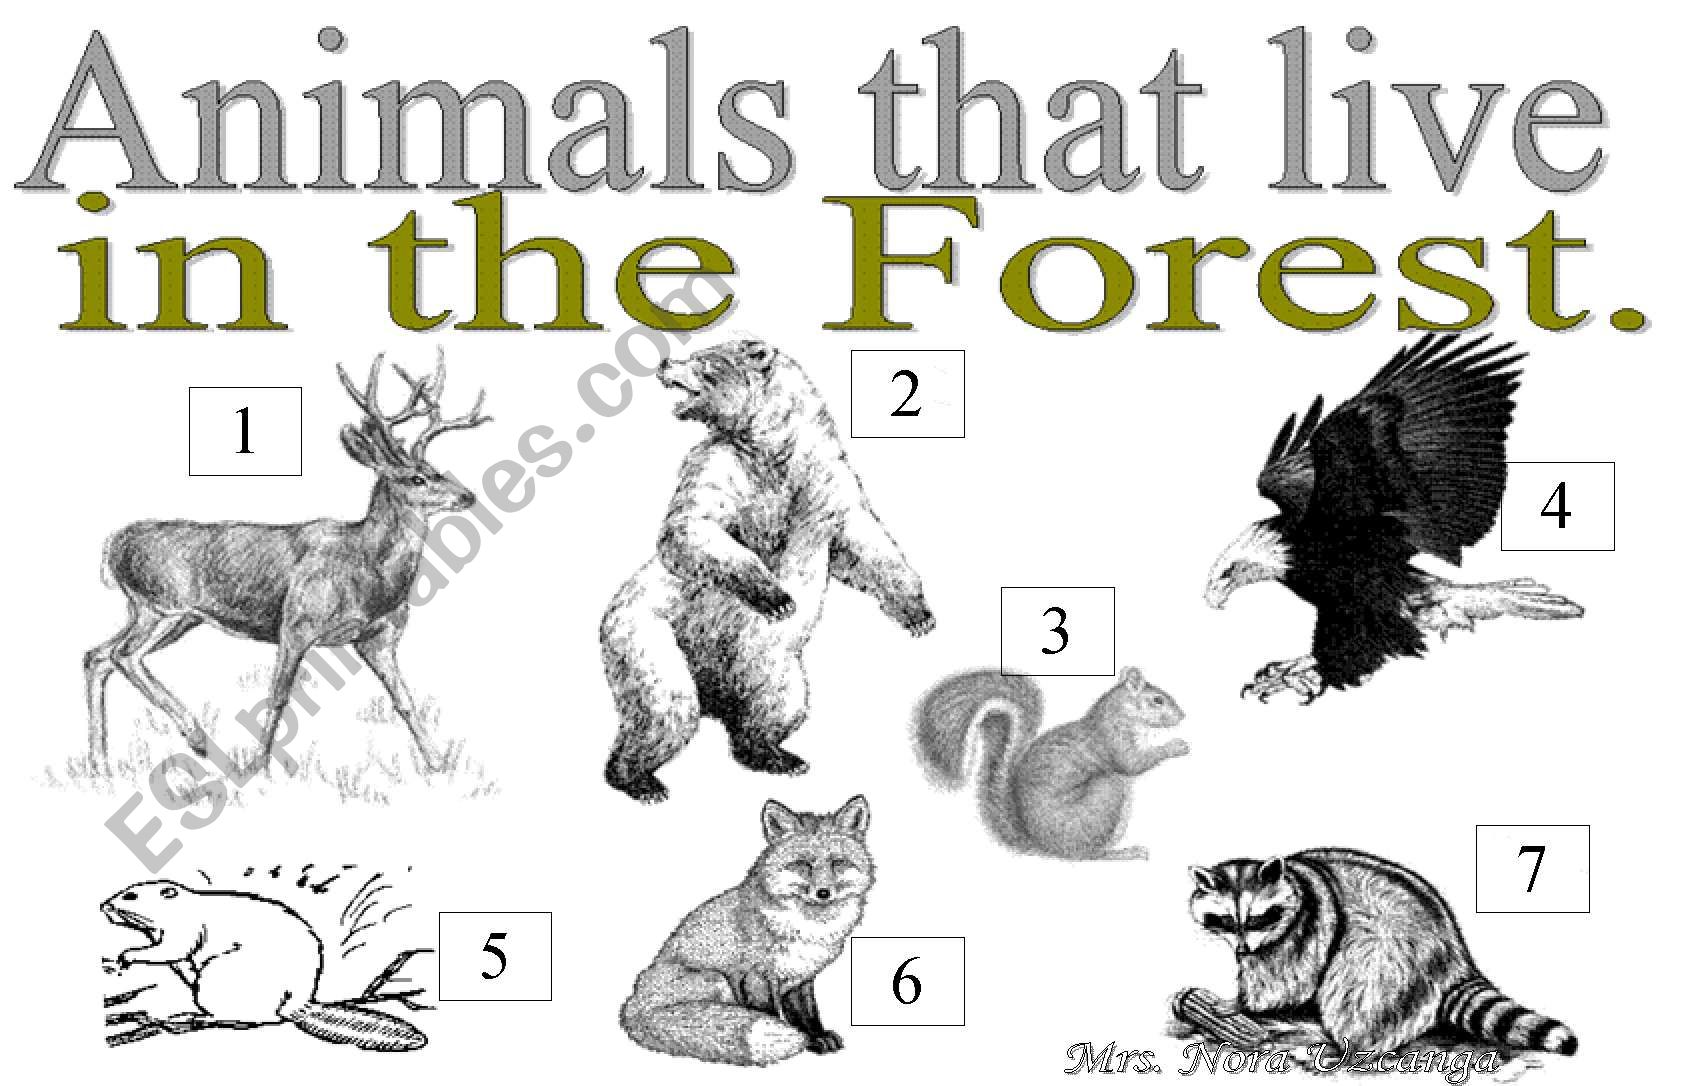 ANIMALS THAT LIVE IN THE FOREST